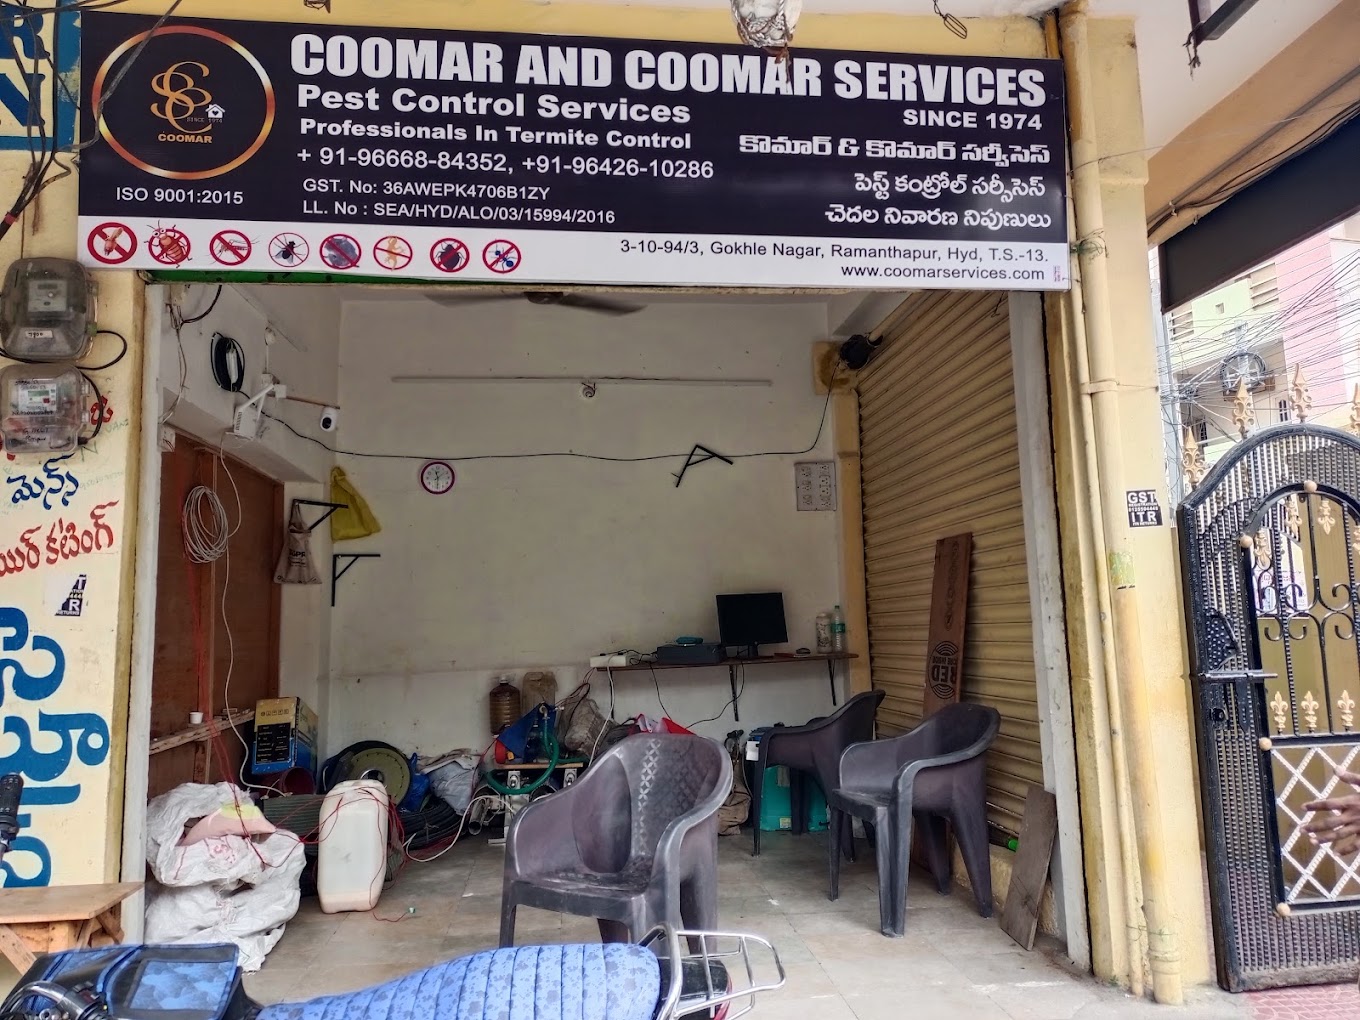 Coomar&Coomar Services